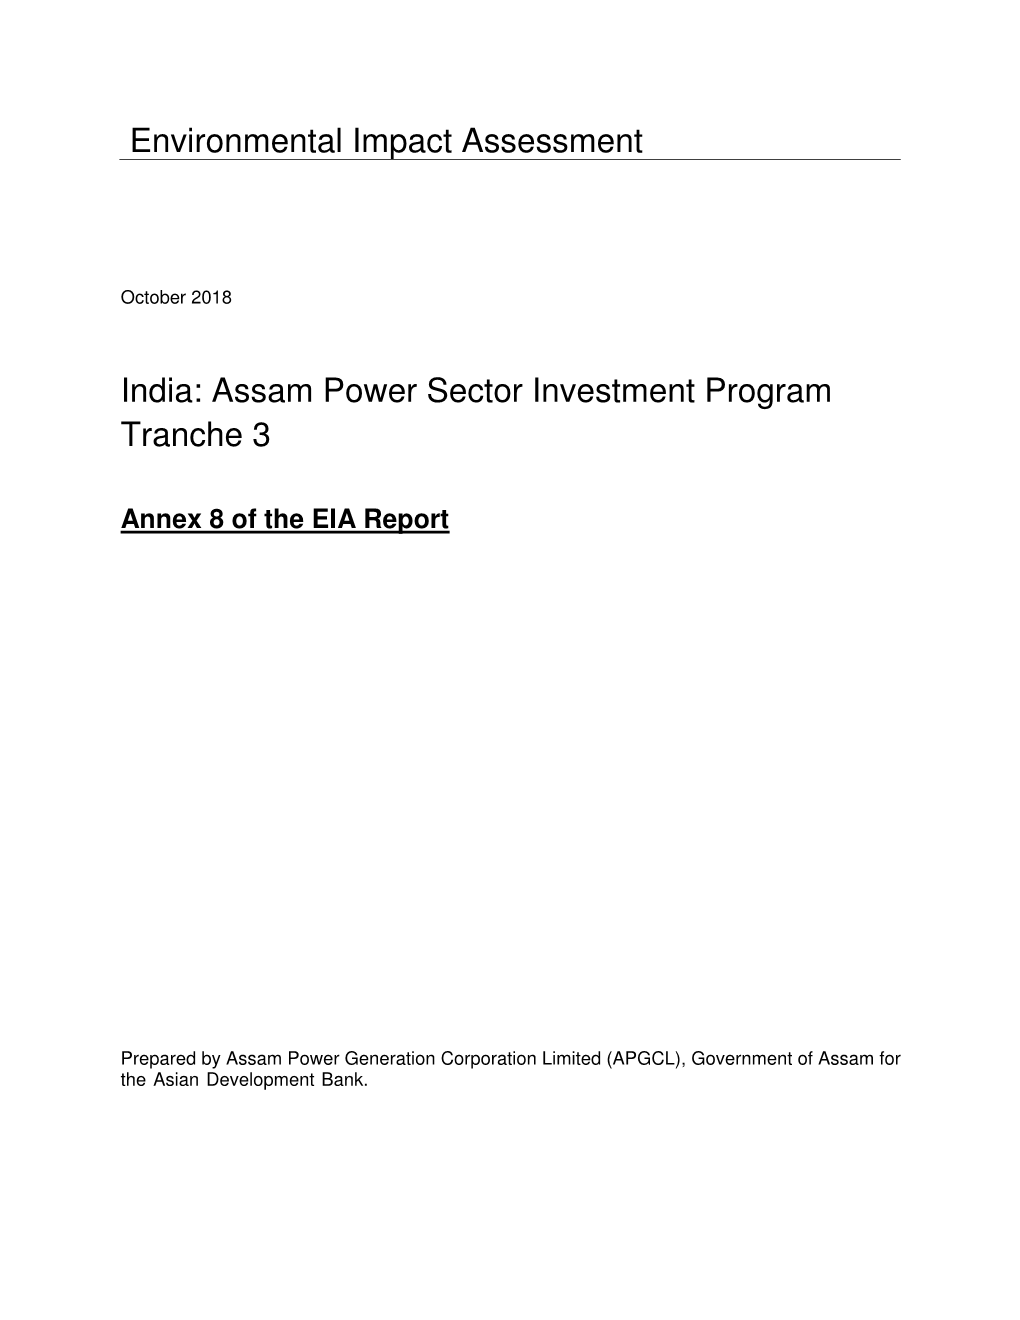 Climate Risk and Vulnerability Assessment – Lower Kopili Hydropower Project, Assam Power Project, India